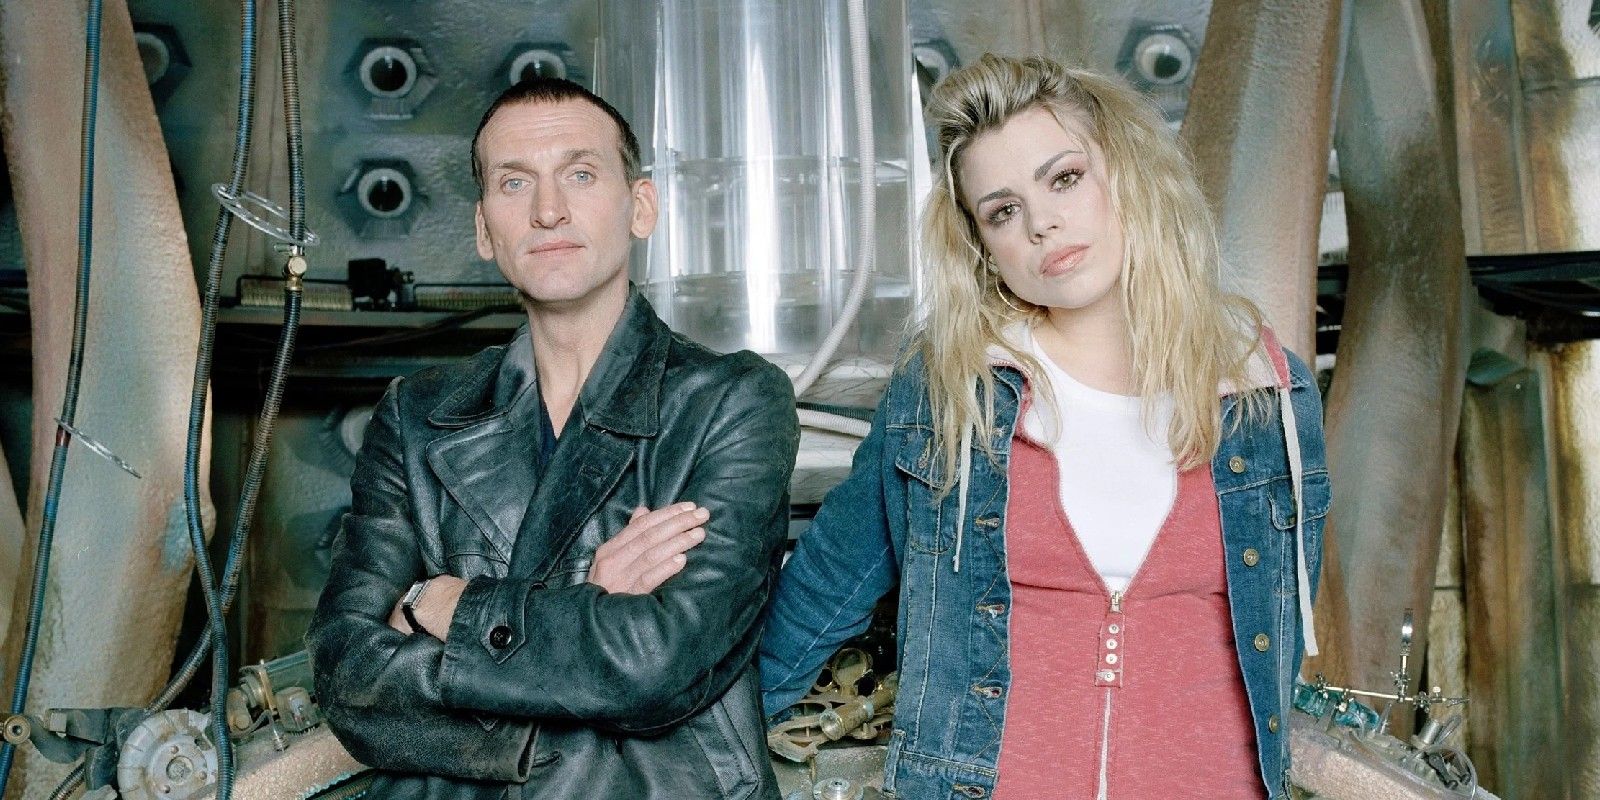 The Ninth Doctor and Rose posing together in Doctor Who